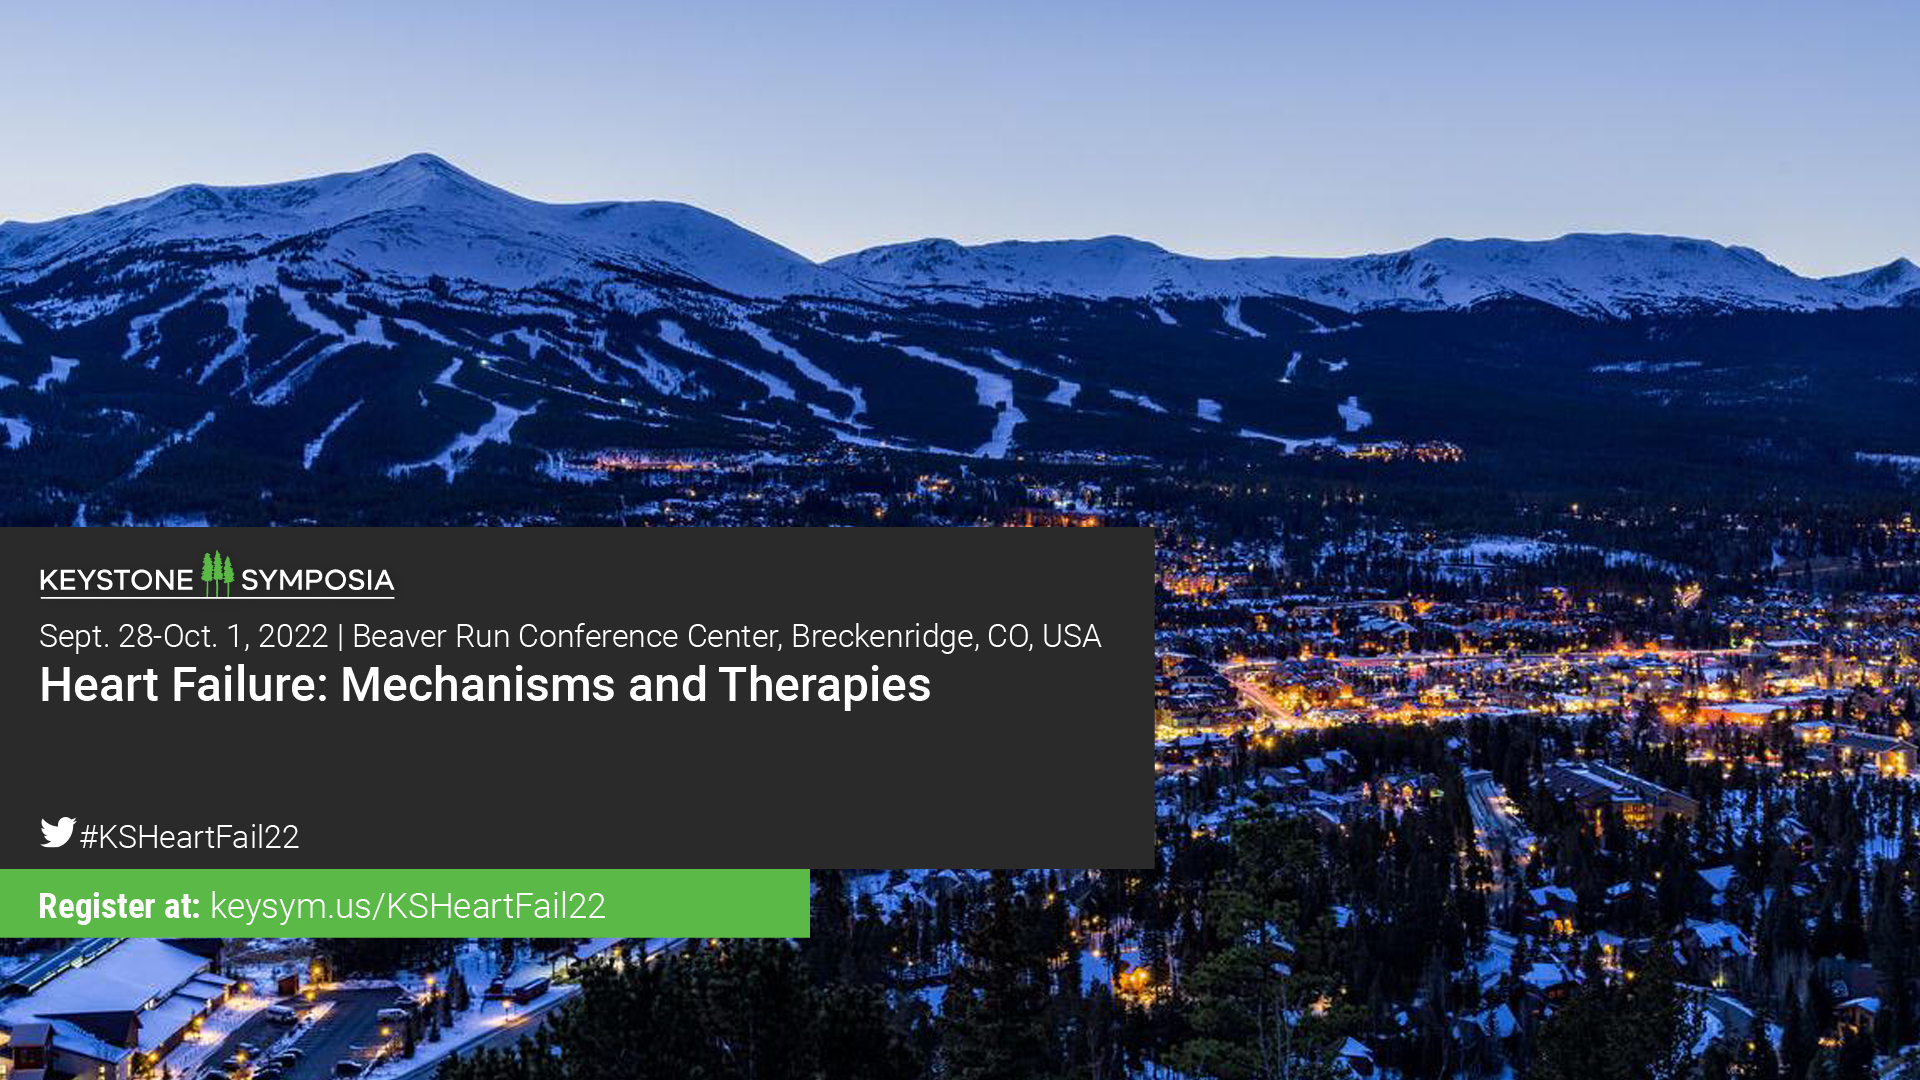 Register for #Autophagy and Disease on Dec. 3-6 in Keystone, CO